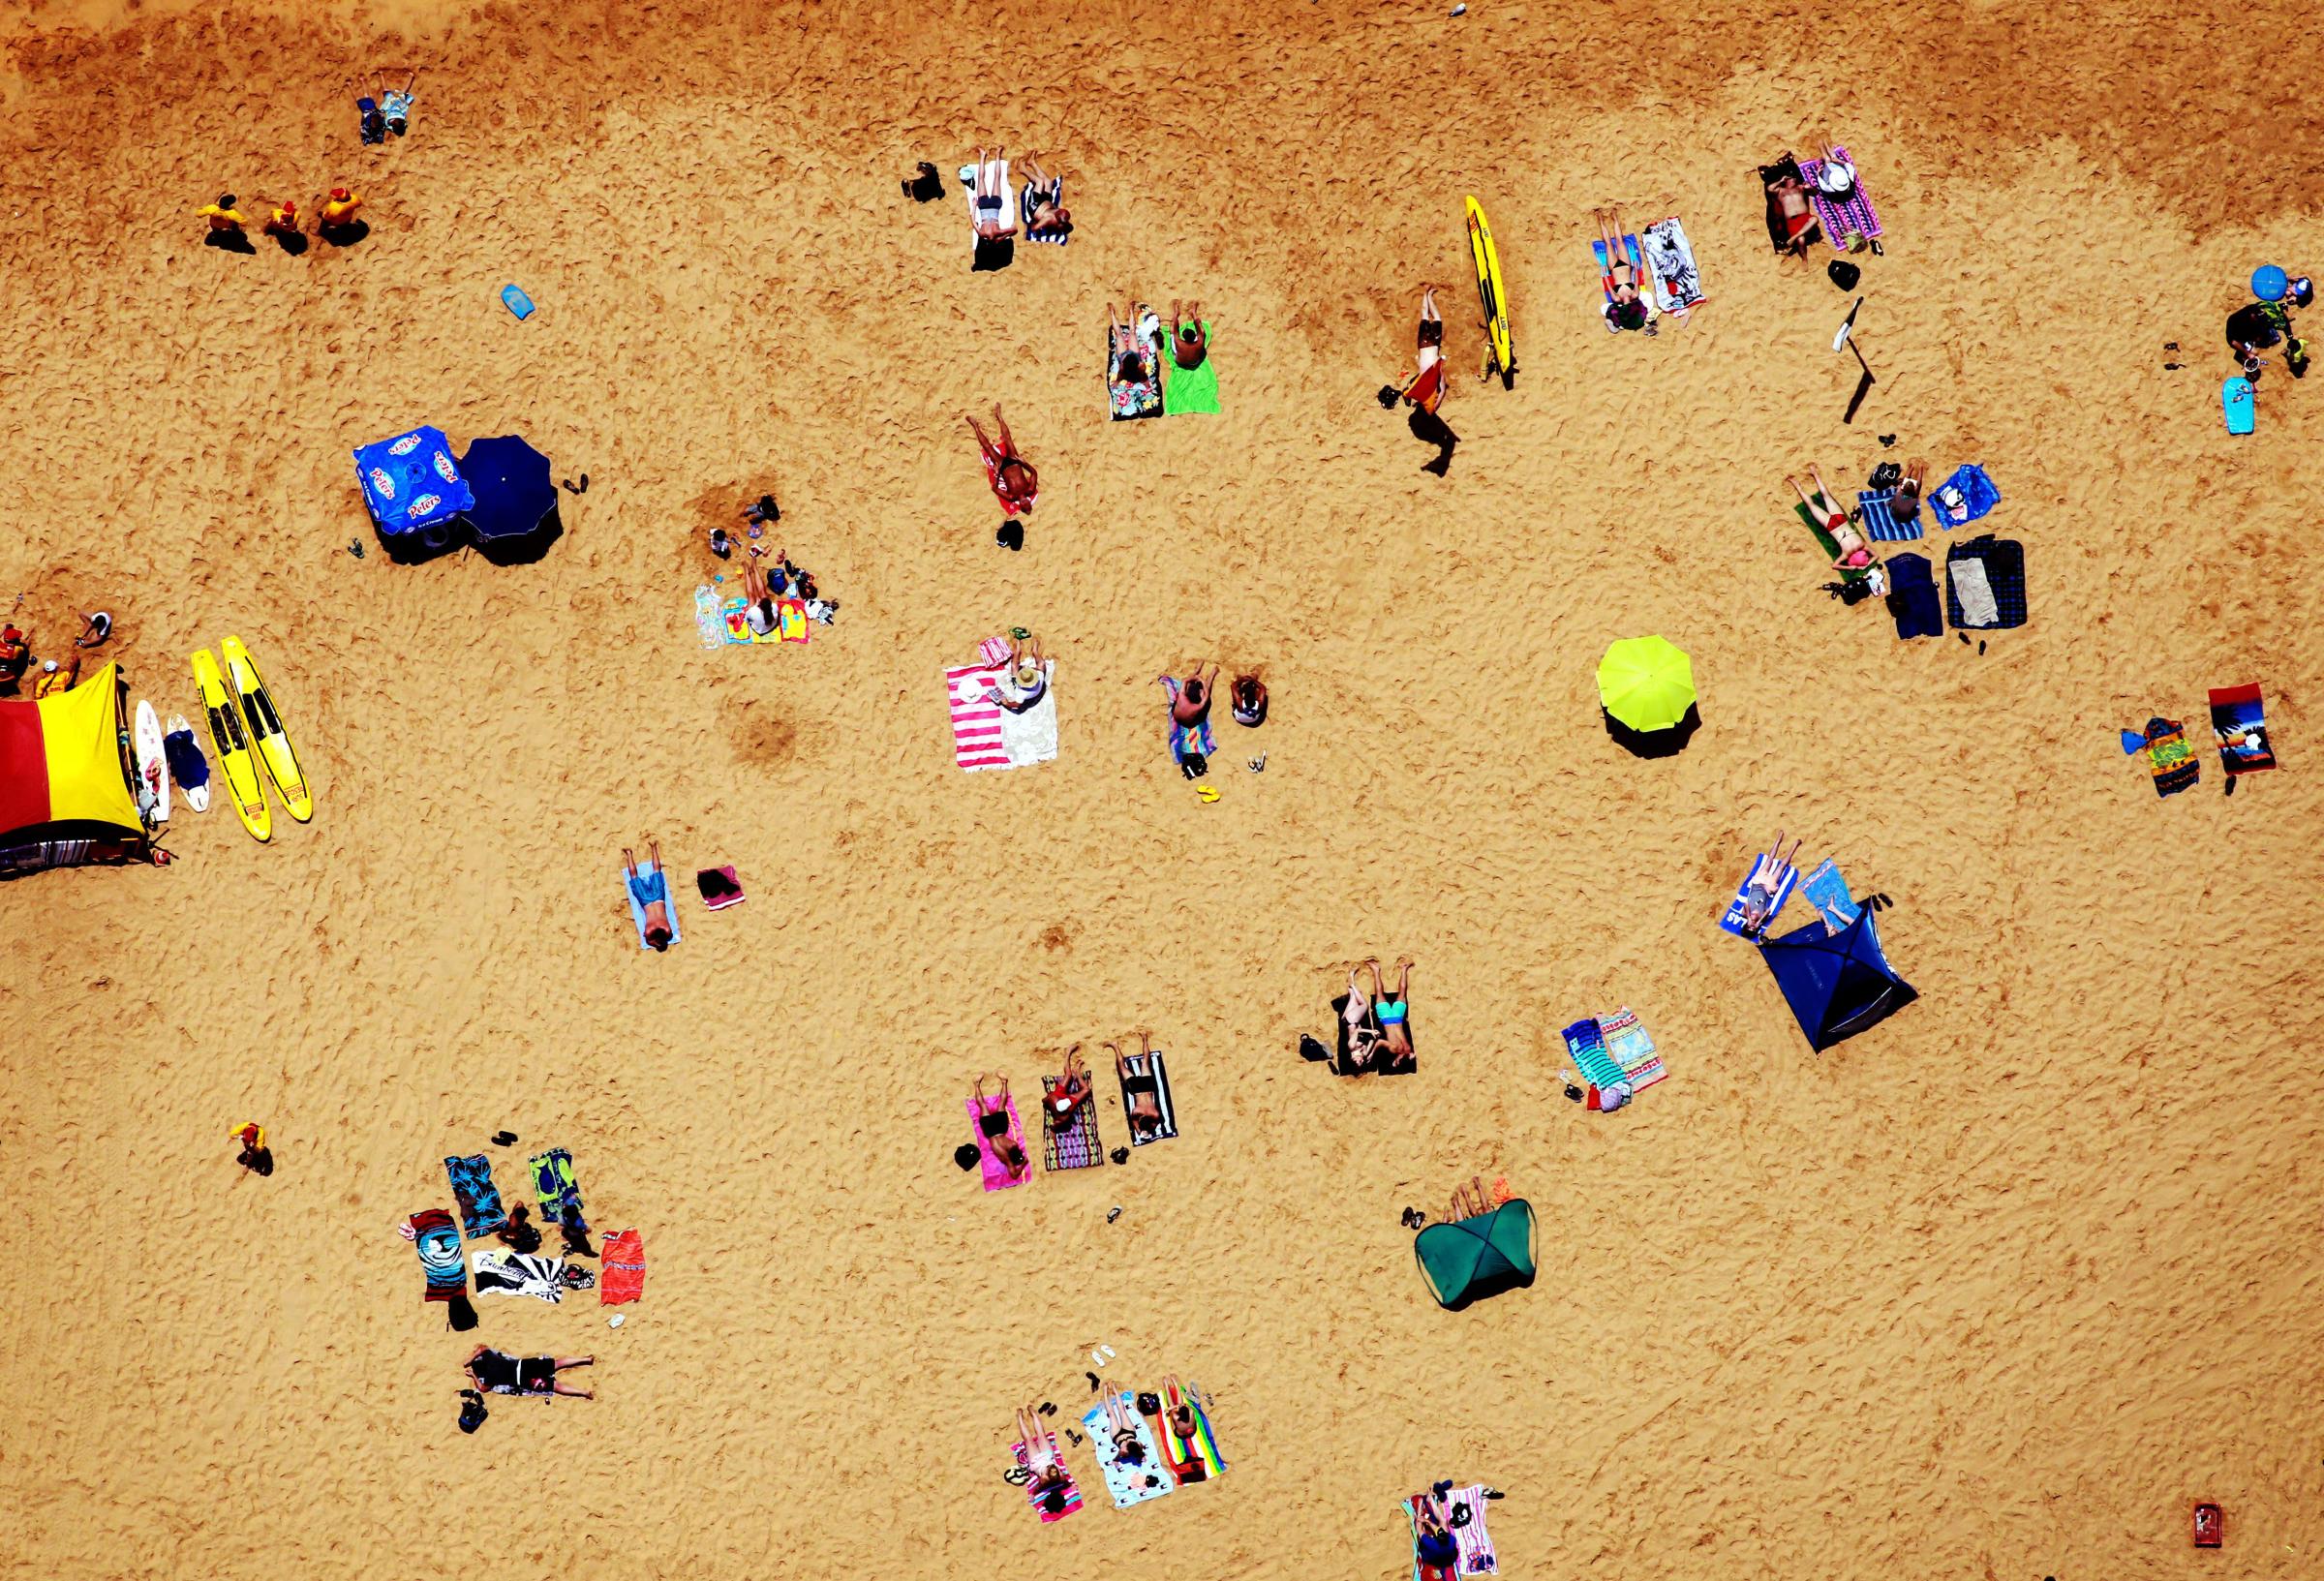 Beachgoers relax at Terrigal Beach as summer arrives on the Central Coast of New South Wales, Australia, Dec. 1, 2012.